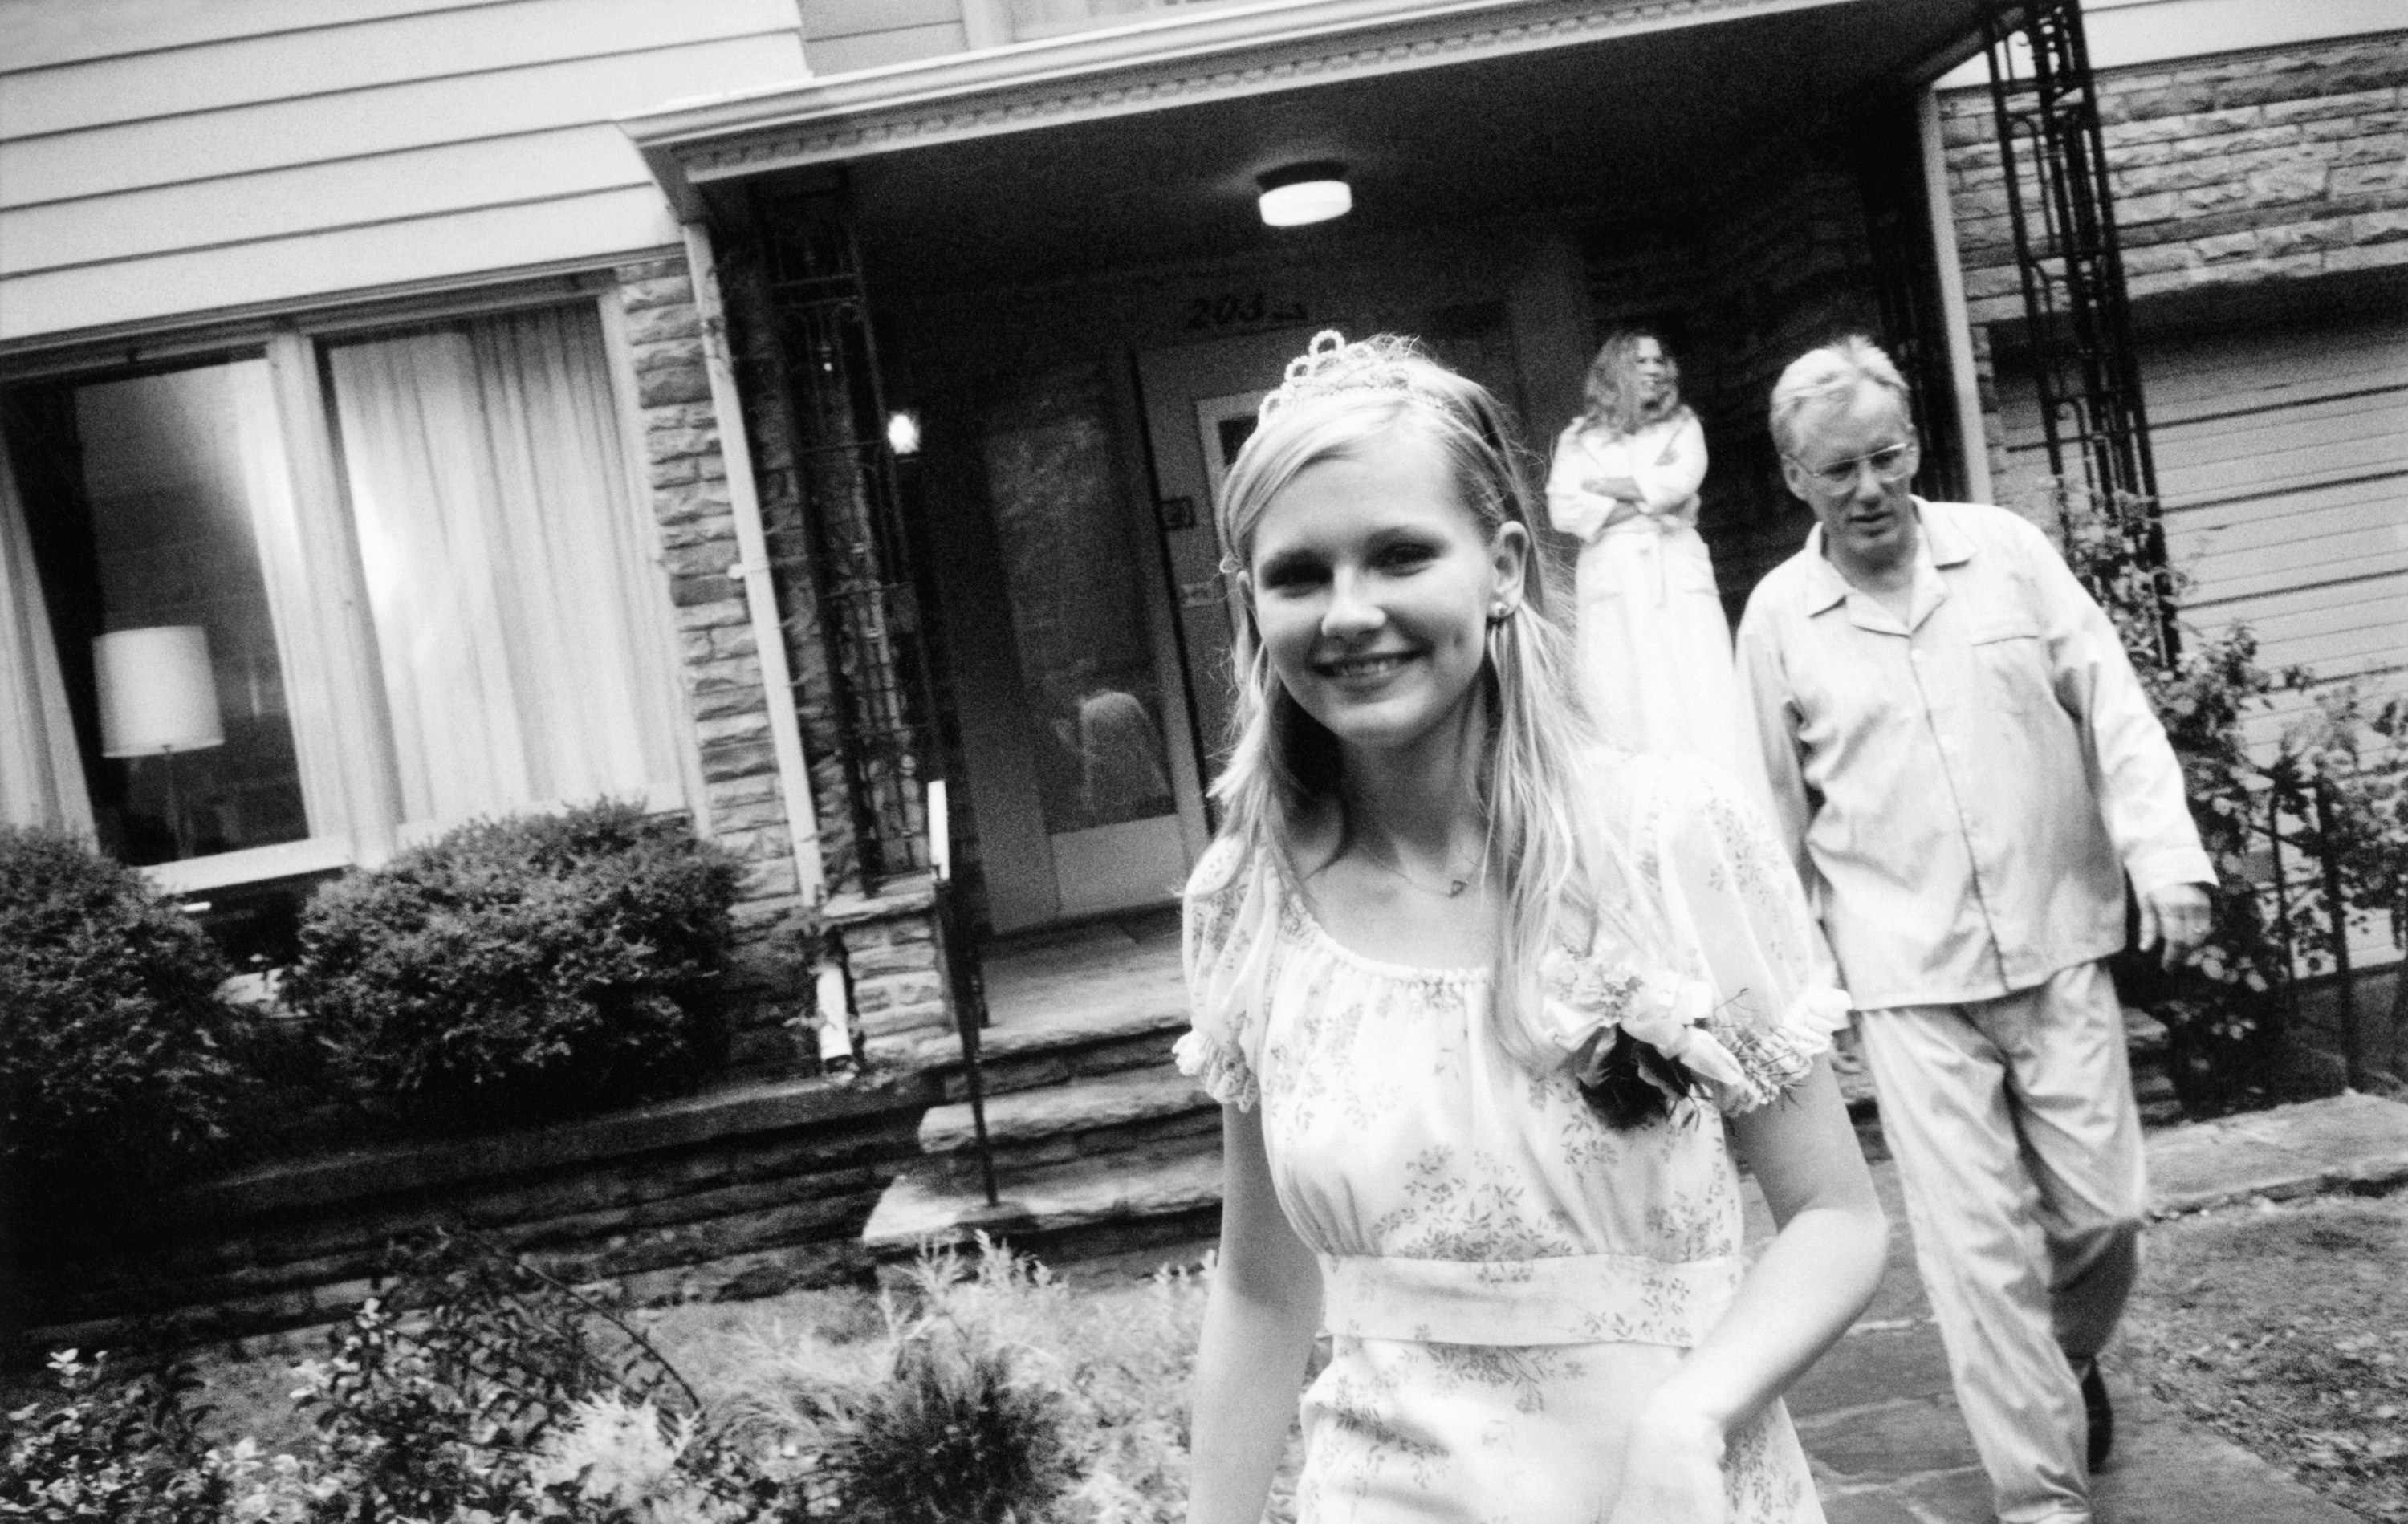 Dunst wears a dress and tiara while walking in front of a house with James Woods behind her